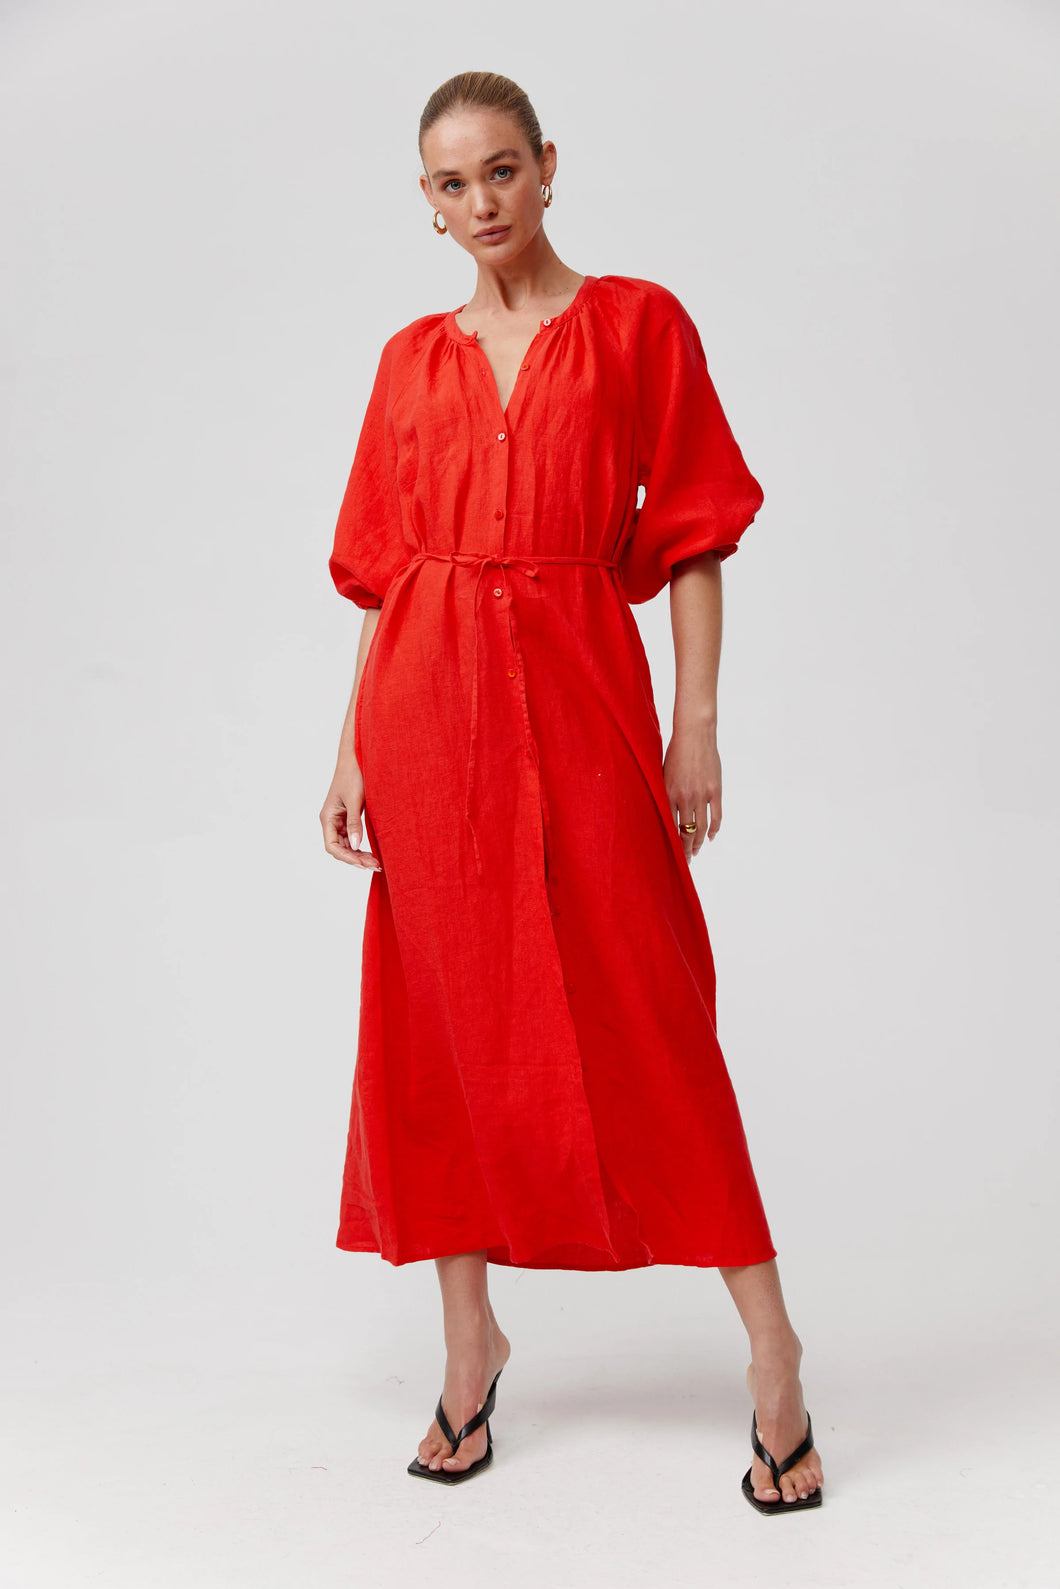 Coco Dress-Ruby Red